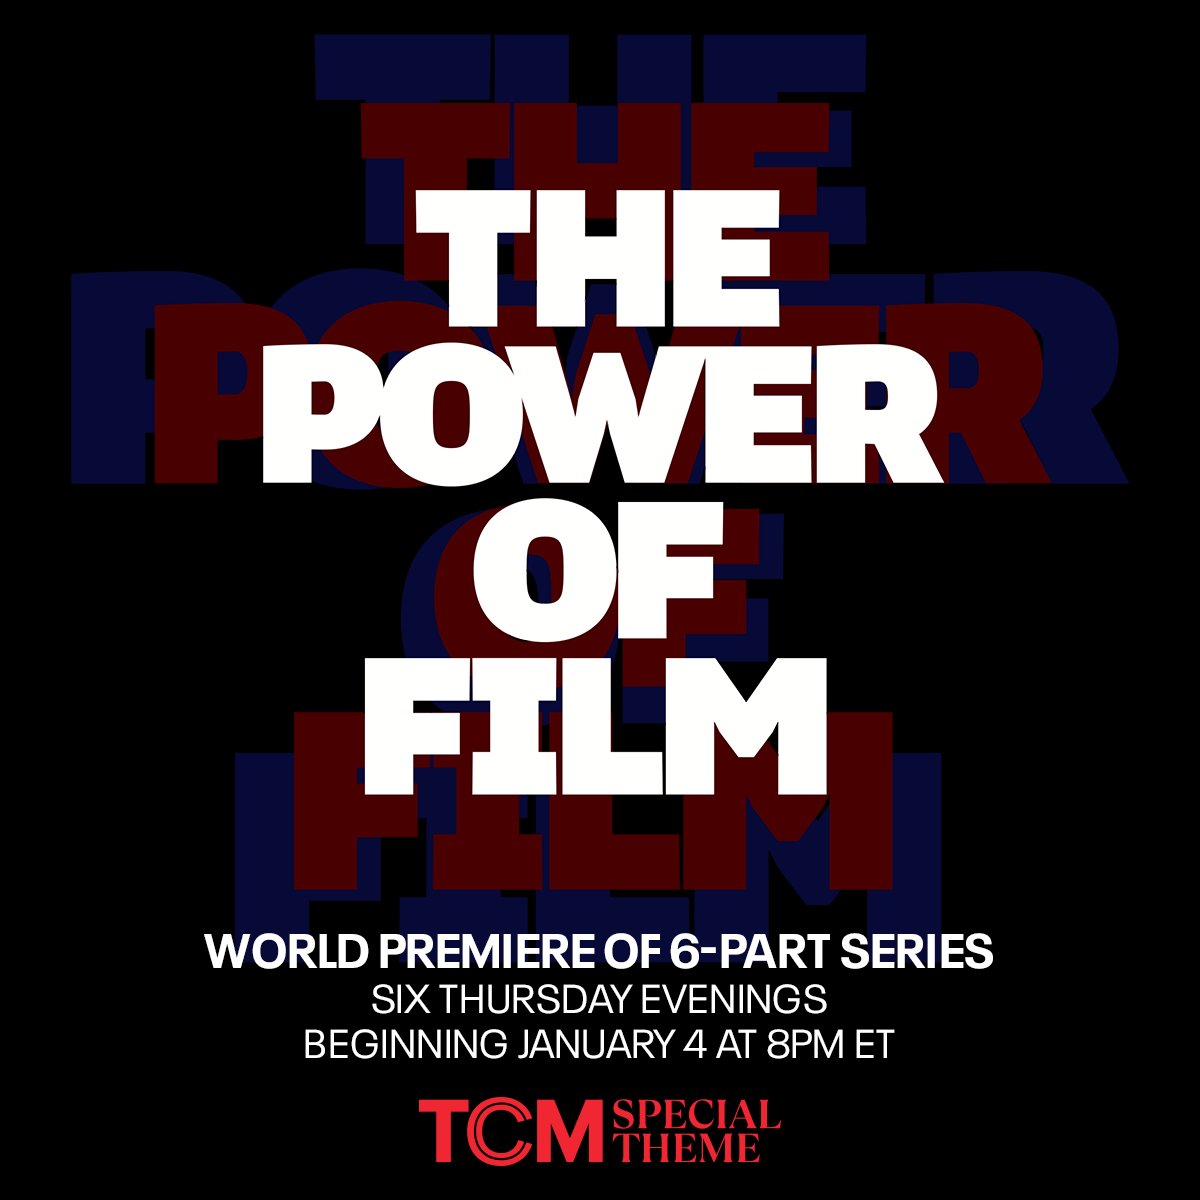 Tonight filmmakers Doug Pray & Laura Gabbert join @davekarger to debut their 6-part documentary series, THE POWER OF FILM. Exploring why great movies work and last, join us for the Episode 1 premiere followed by the films discussed at 8pm ET. Learn more: bit.ly/4aB59ae